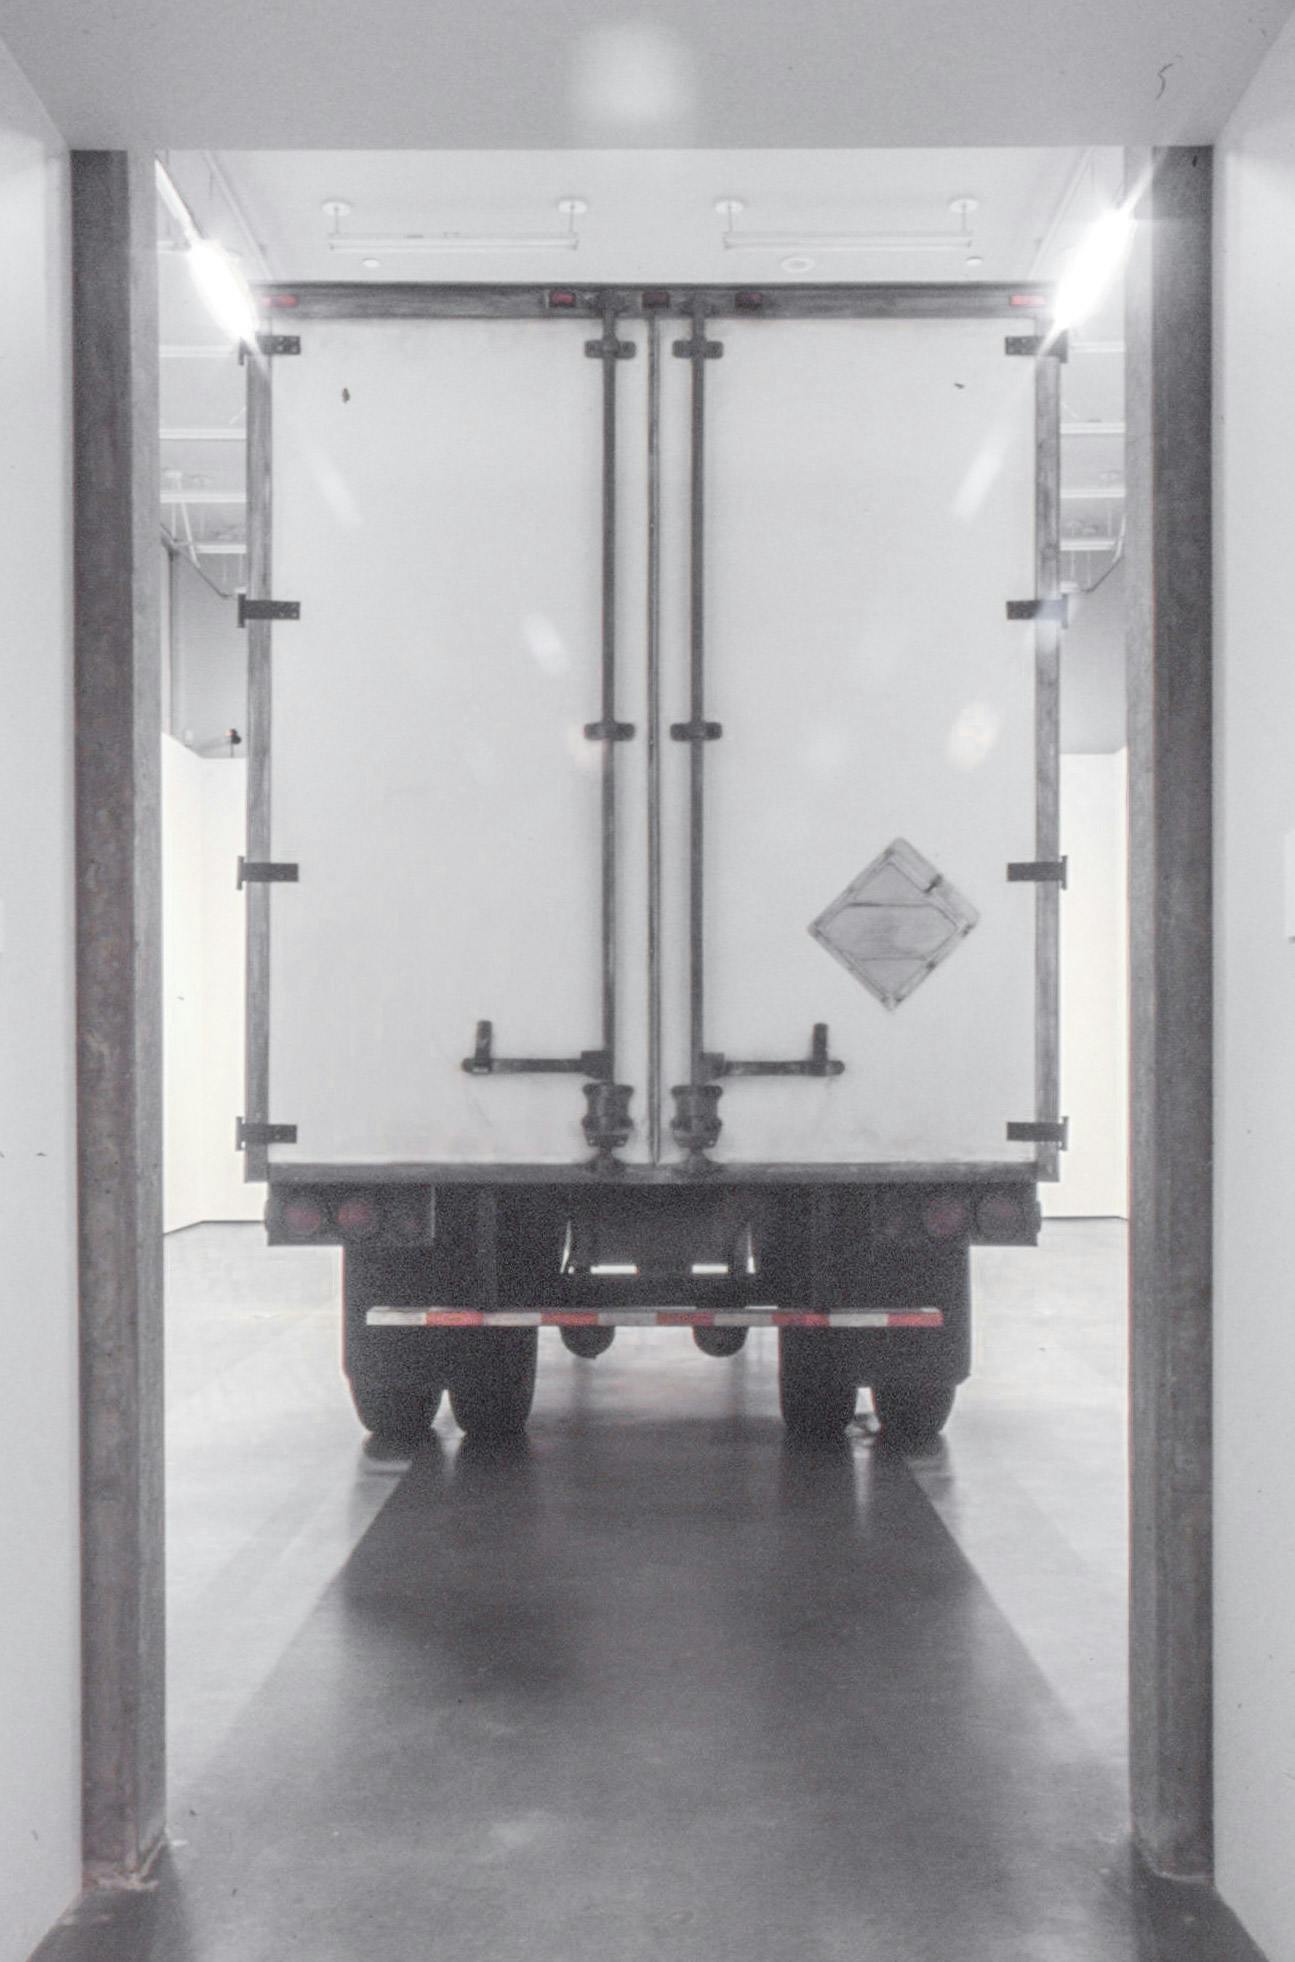 This is the installation shot of Geoffrey Farmer’s exhibition at CAG. A large white semi truck trailer is installed in a gallery space. The trailer is placed to face its back to the gallery entrance.